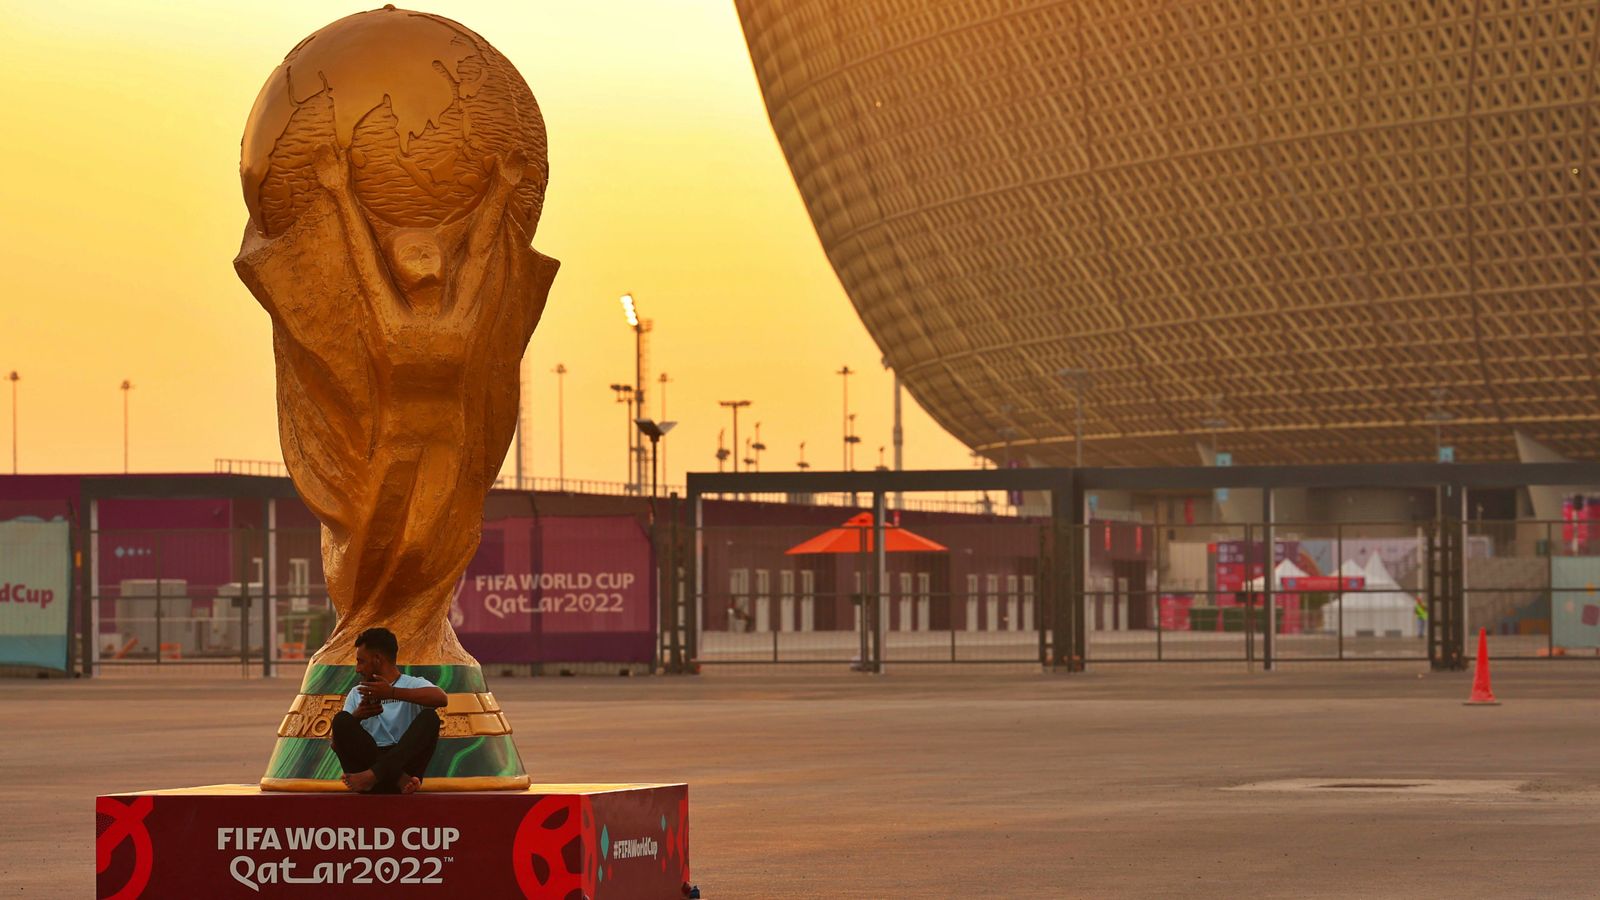 Qatar World Cup: Beer to be banned from stadiums